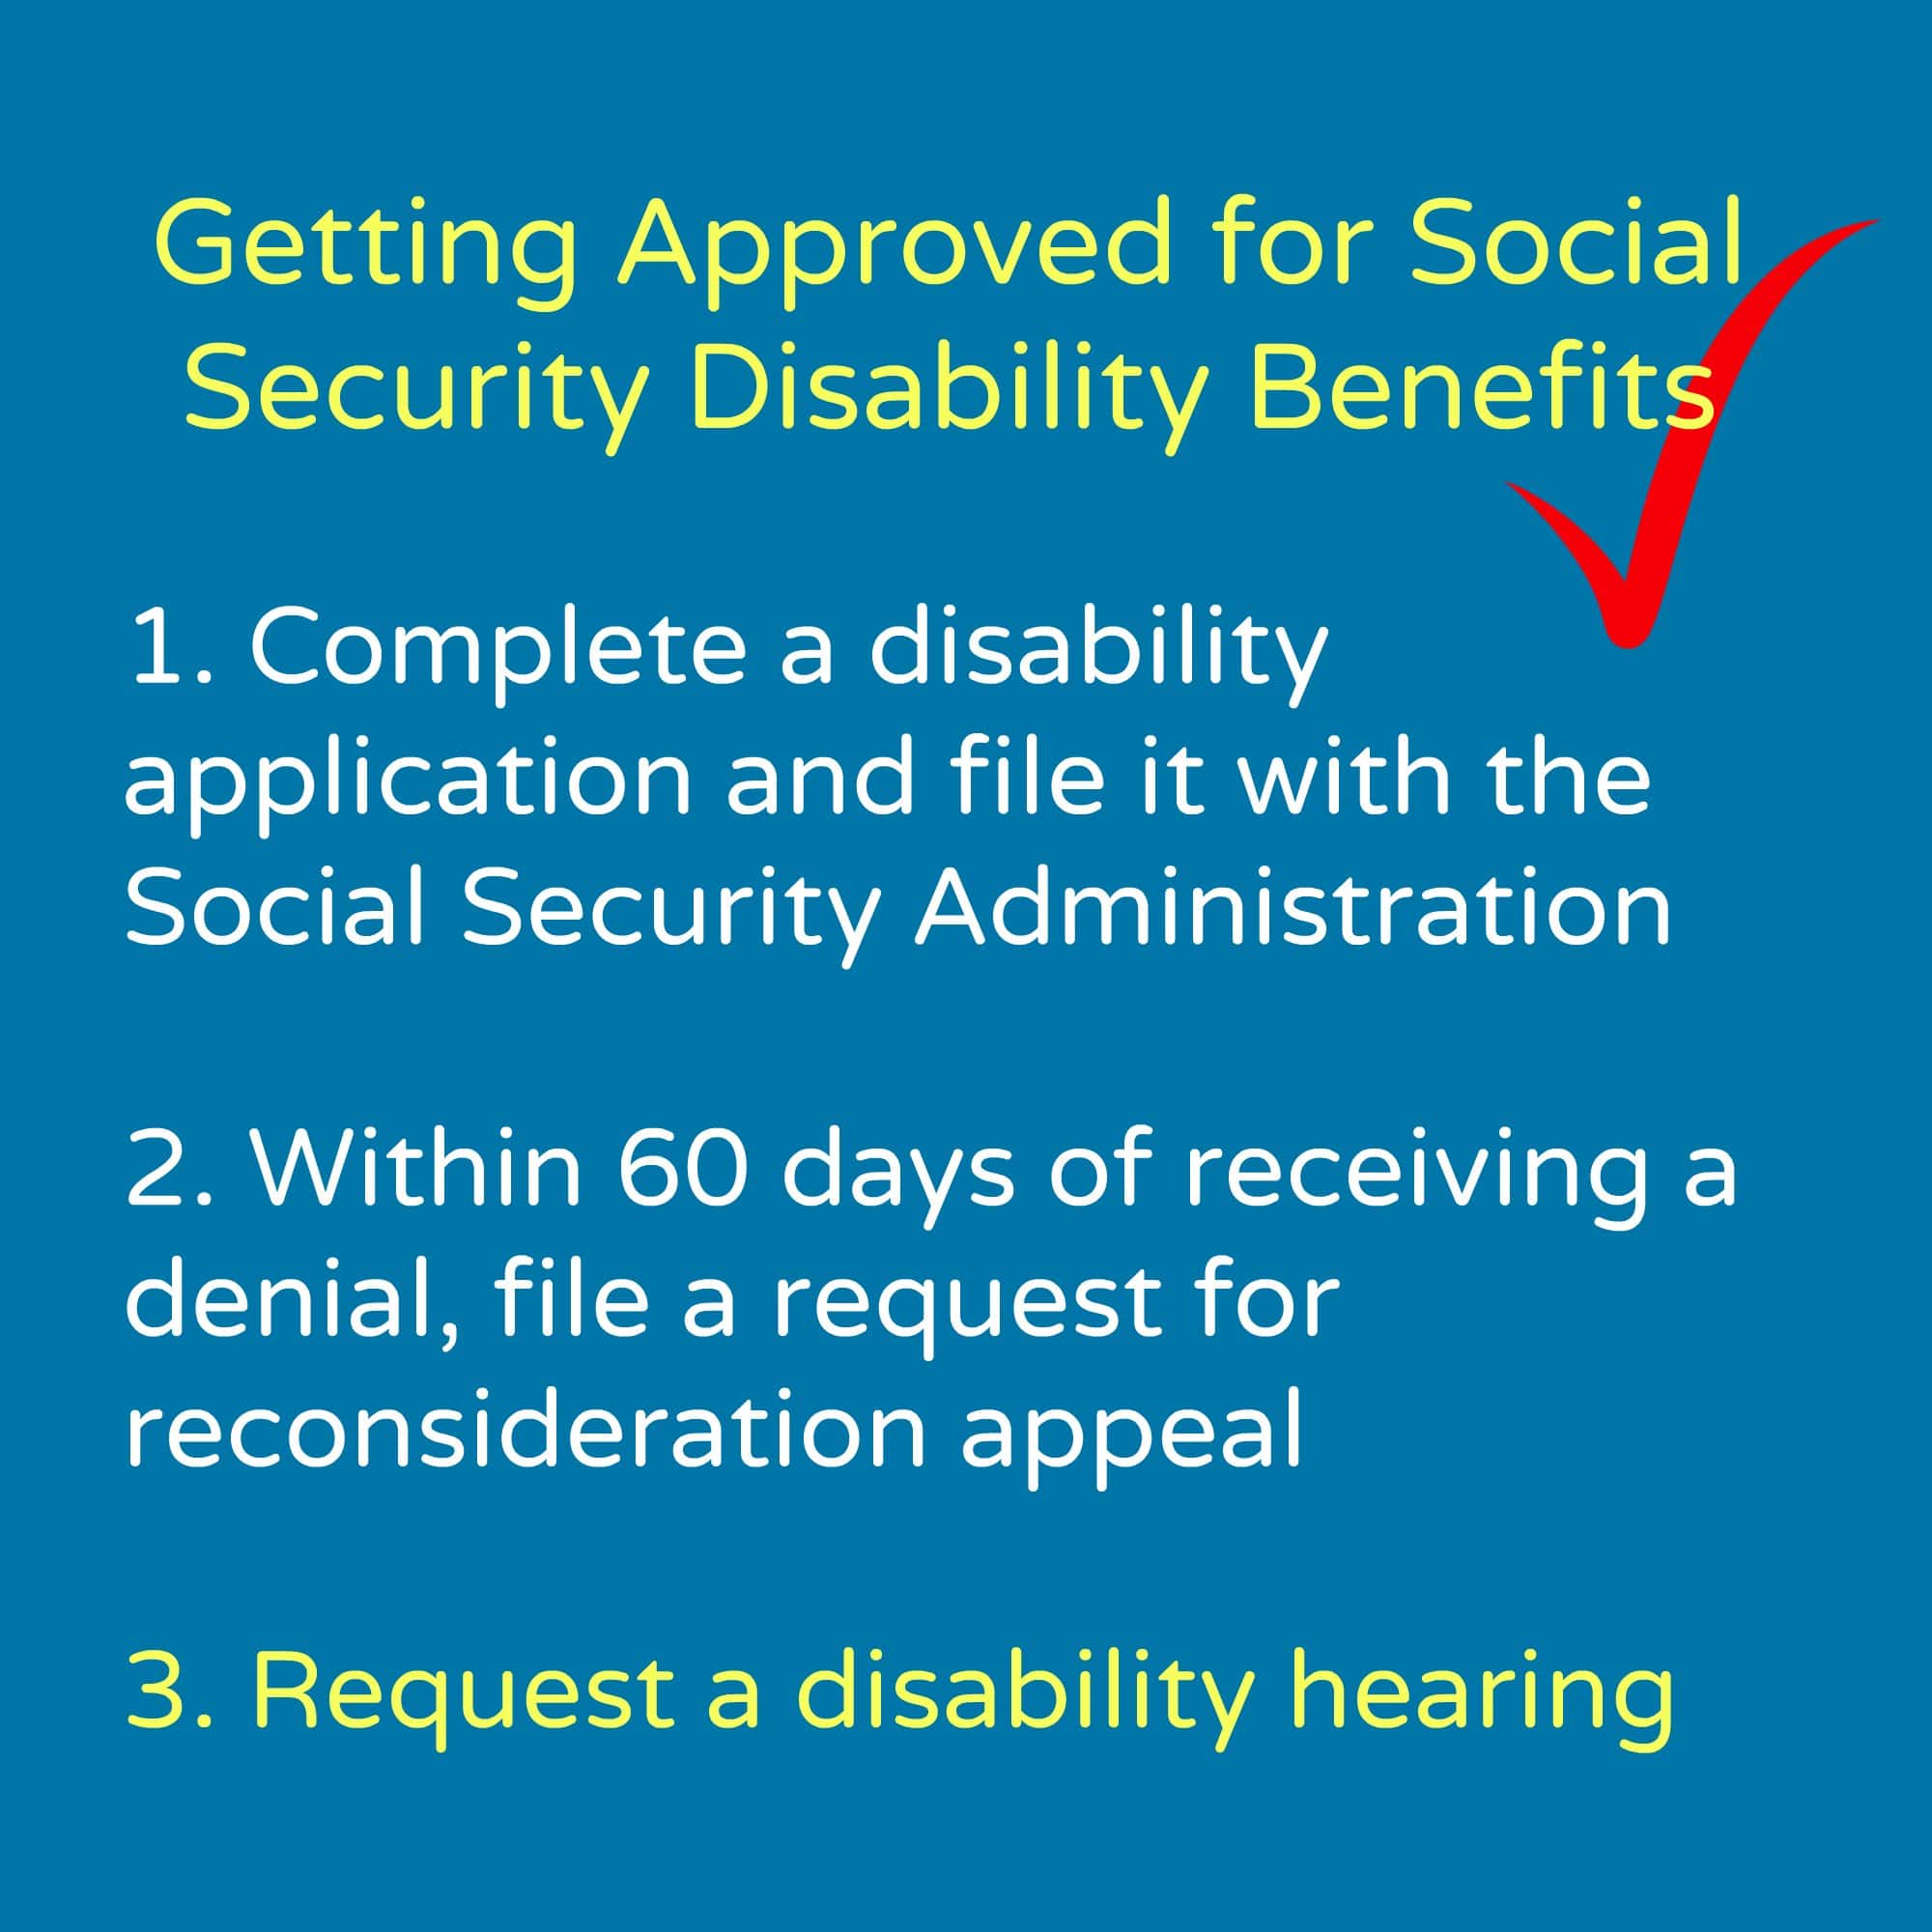 How Long Do Hoosiers Wait for Social Security Disability Hearings?